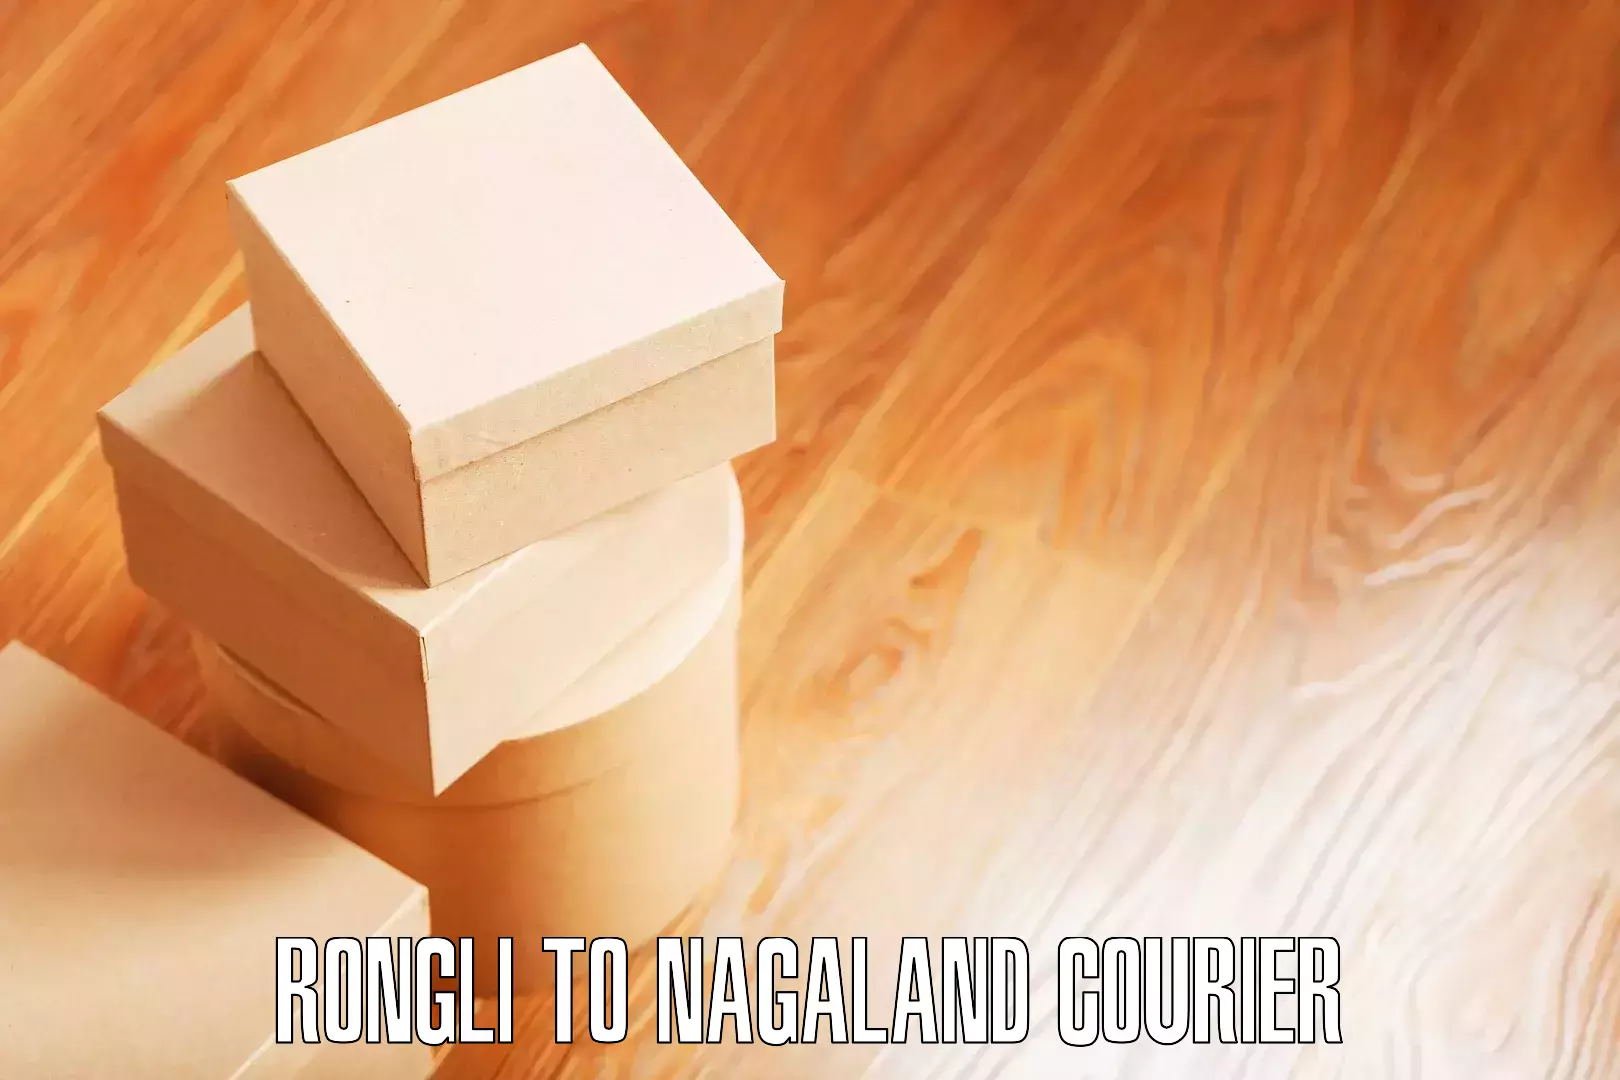 Furniture delivery service Rongli to Nagaland